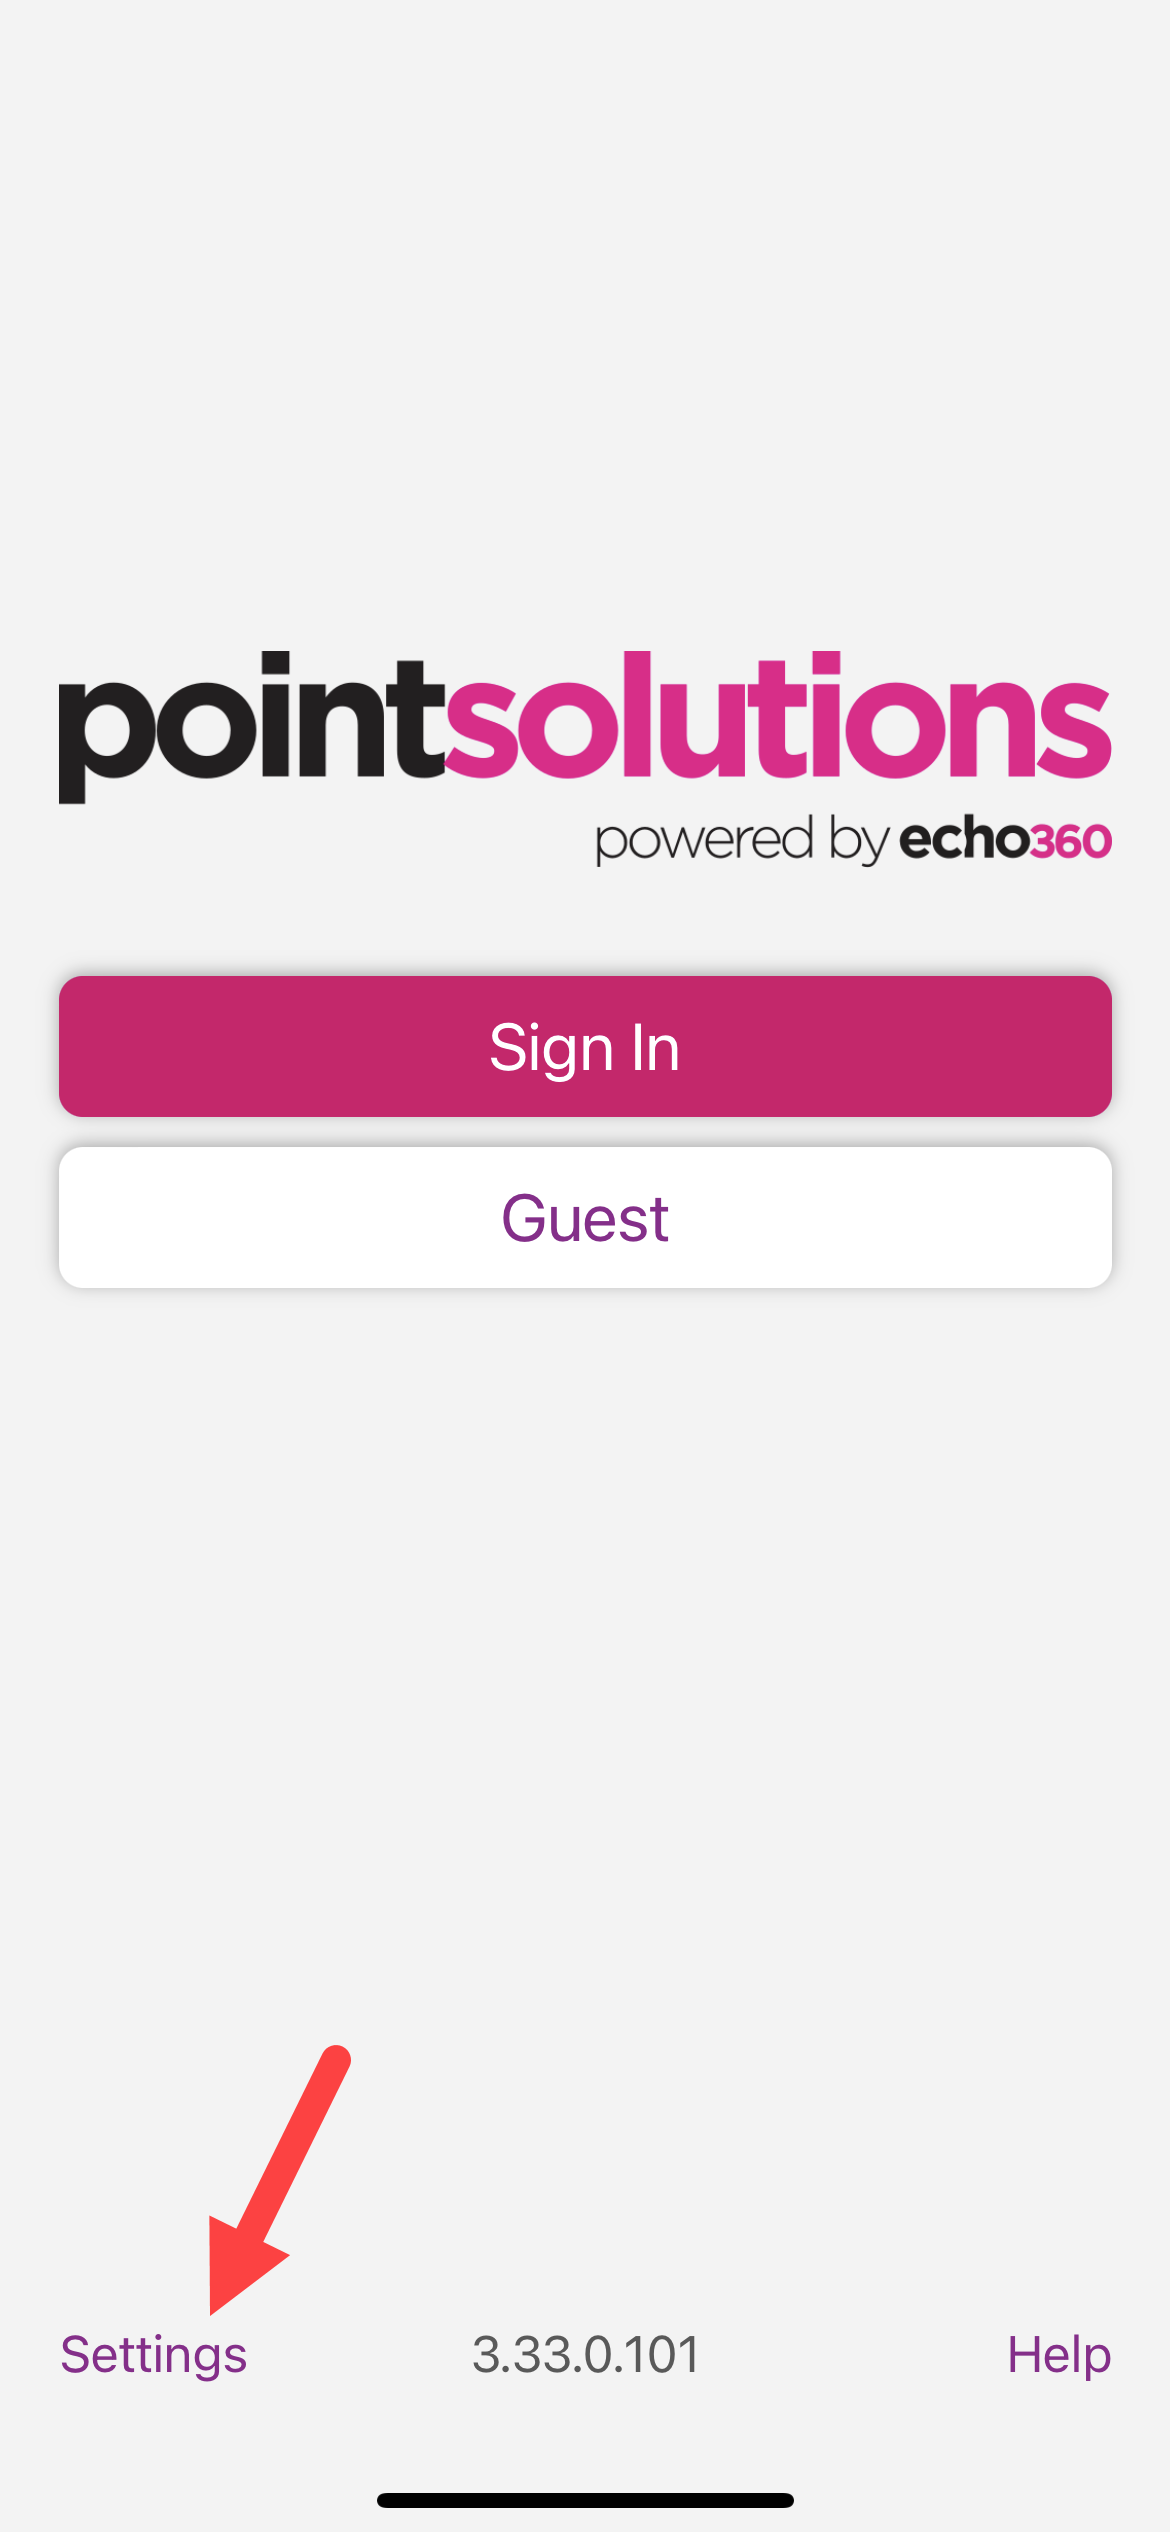 The PointSolutions Participant log in screen with Settings menu identified as described for iOS